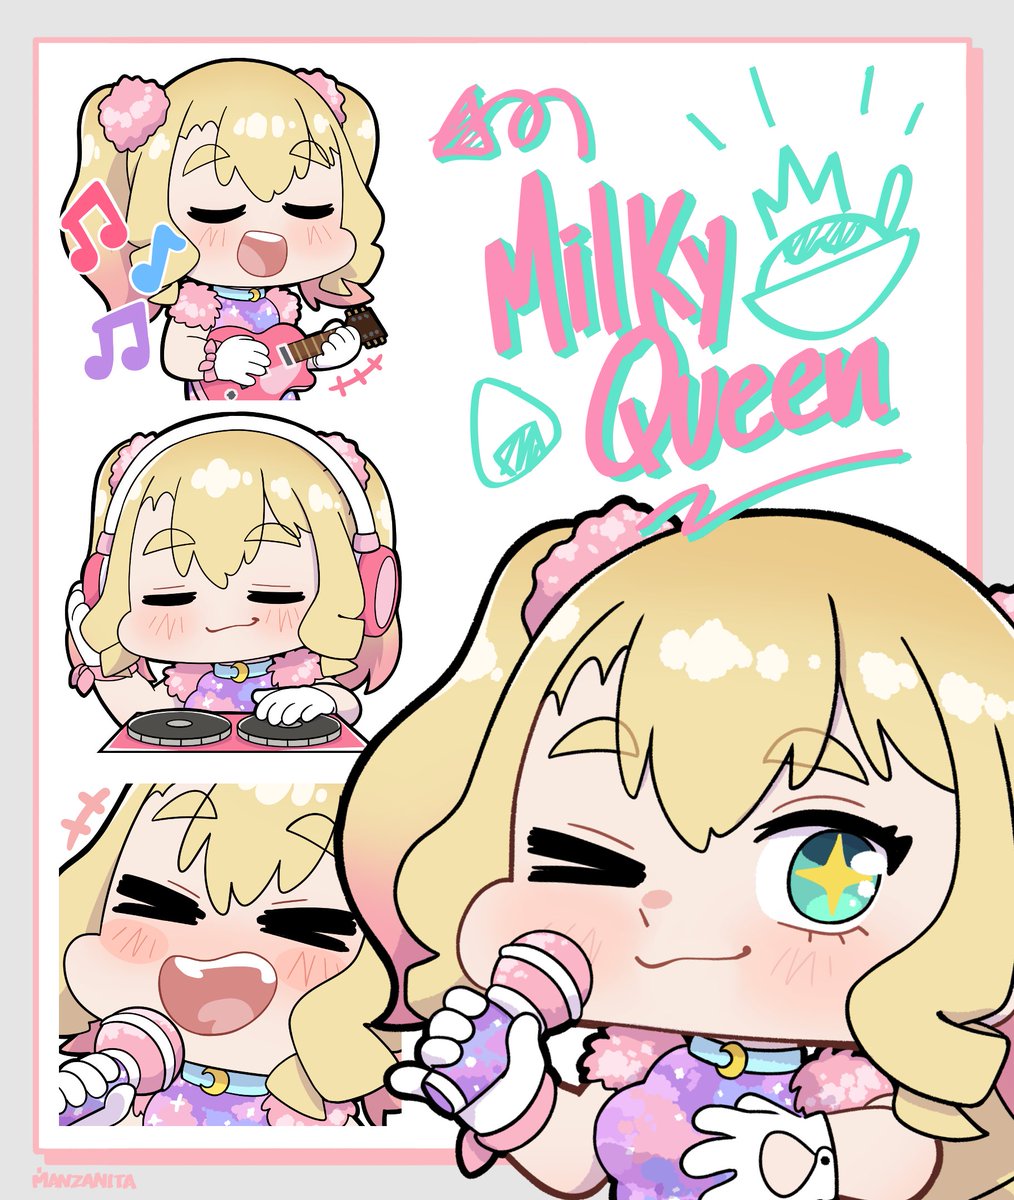 I was in charge of more new emotes and chibi art for the Milky Queen channel in twitch! 👑😊